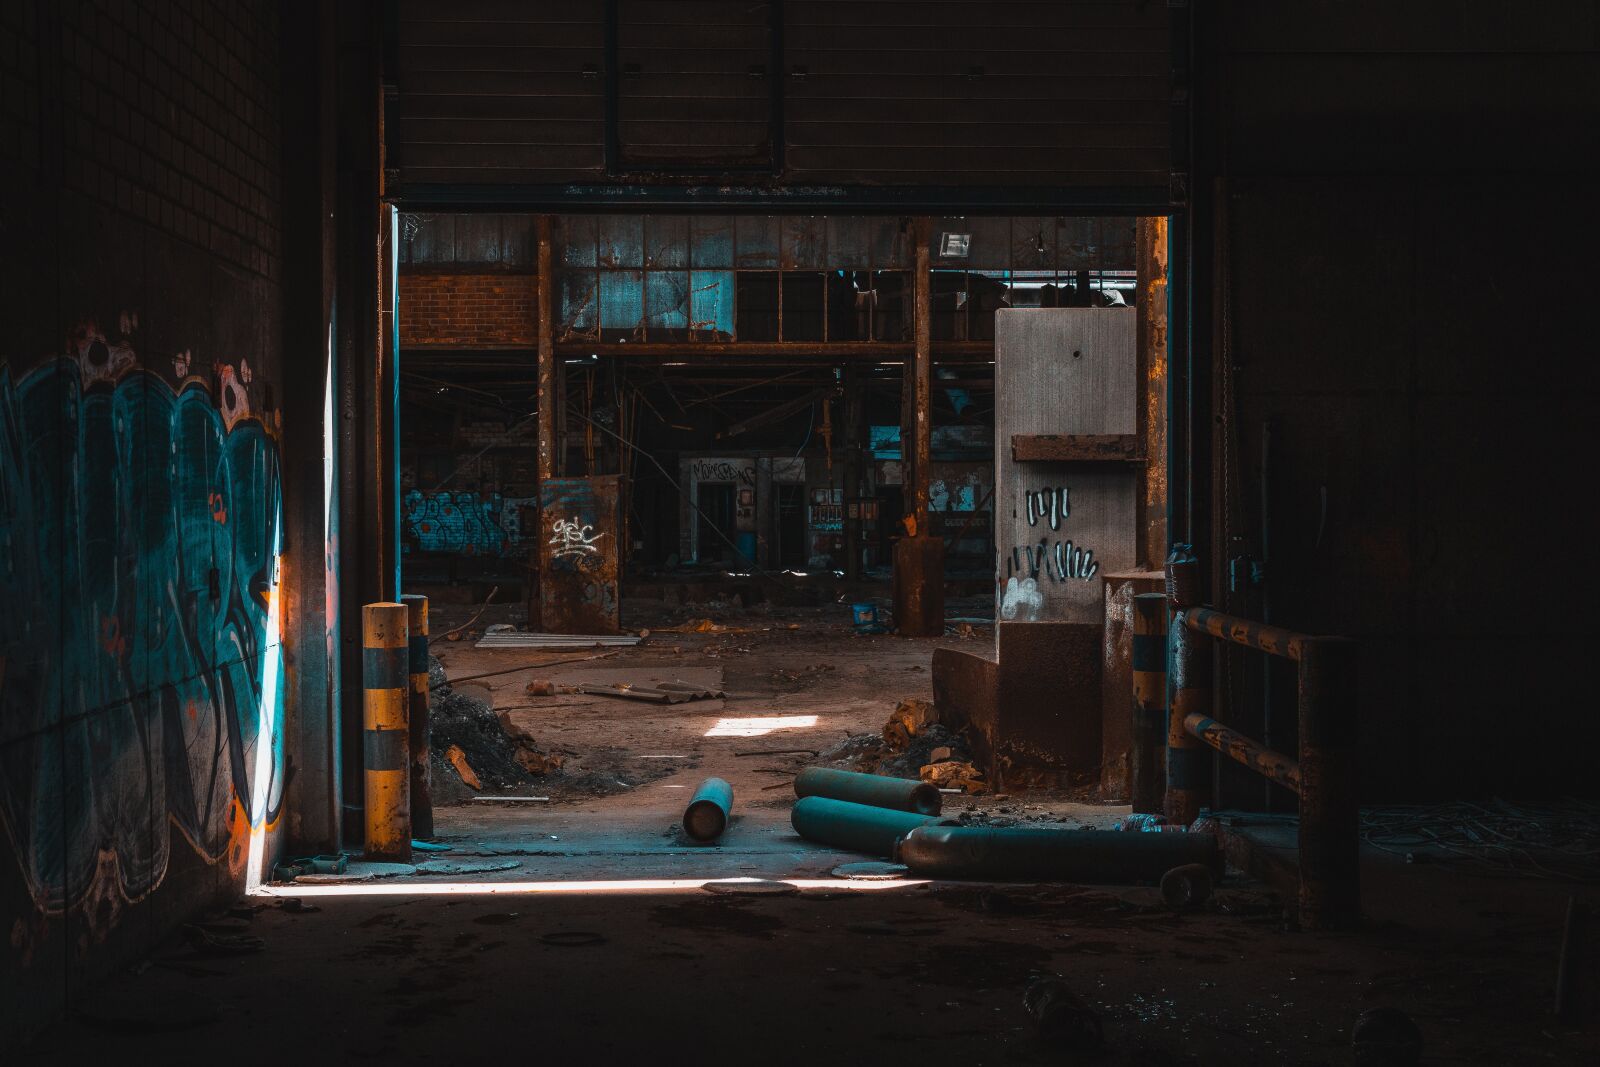 Sony a6300 sample photo. Lost places, lost, abandoned photography